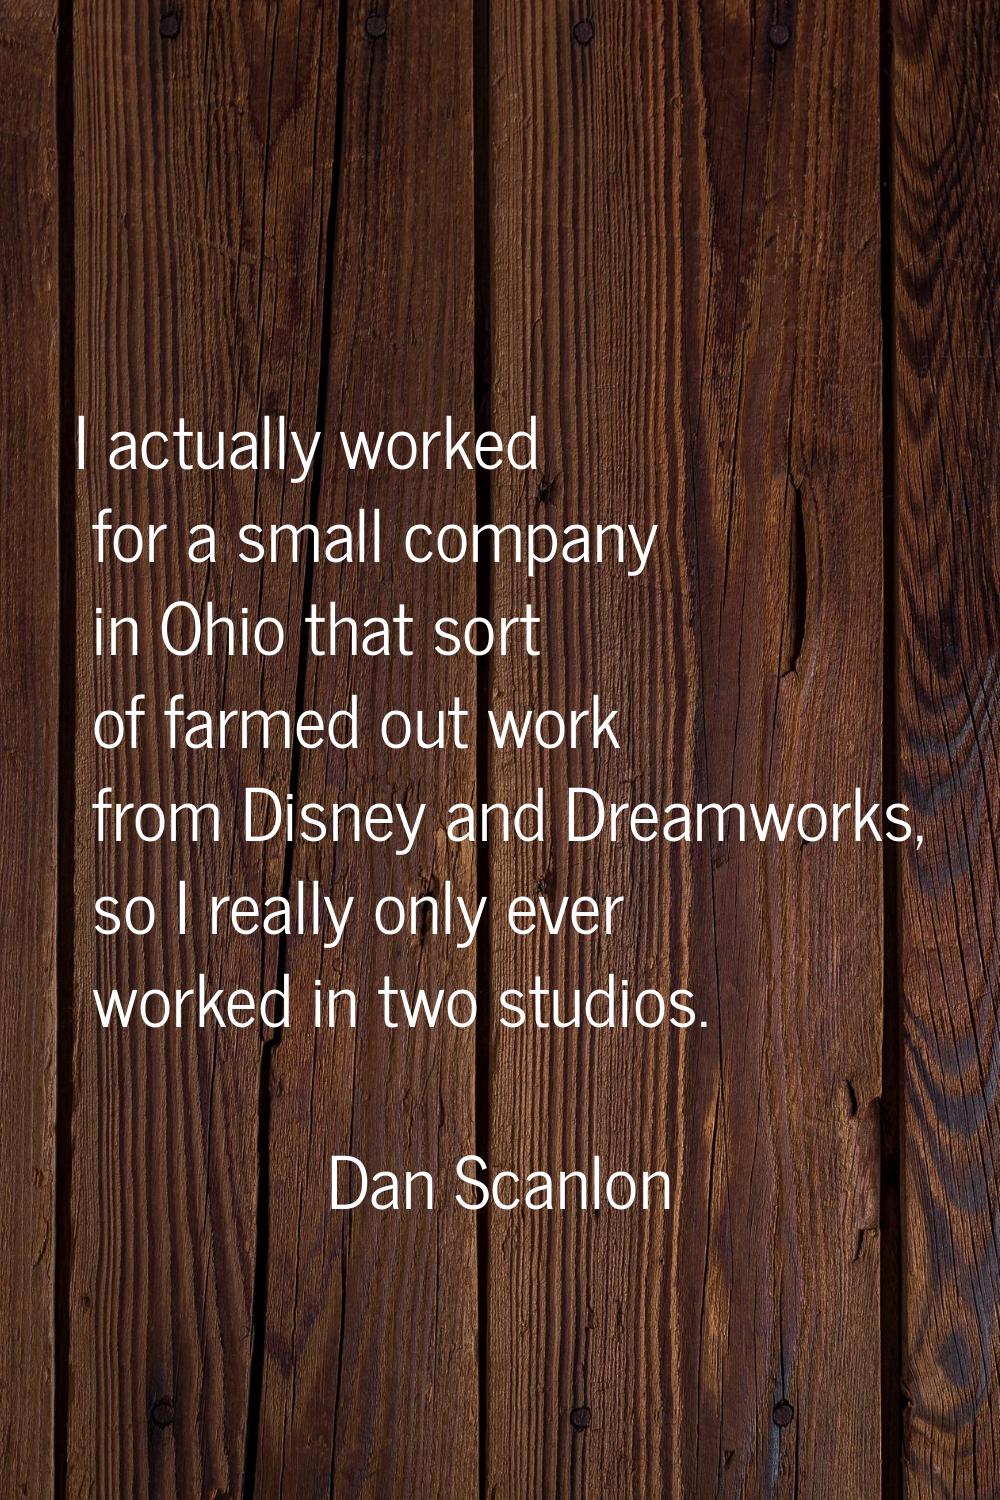 I actually worked for a small company in Ohio that sort of farmed out work from Disney and Dreamwor